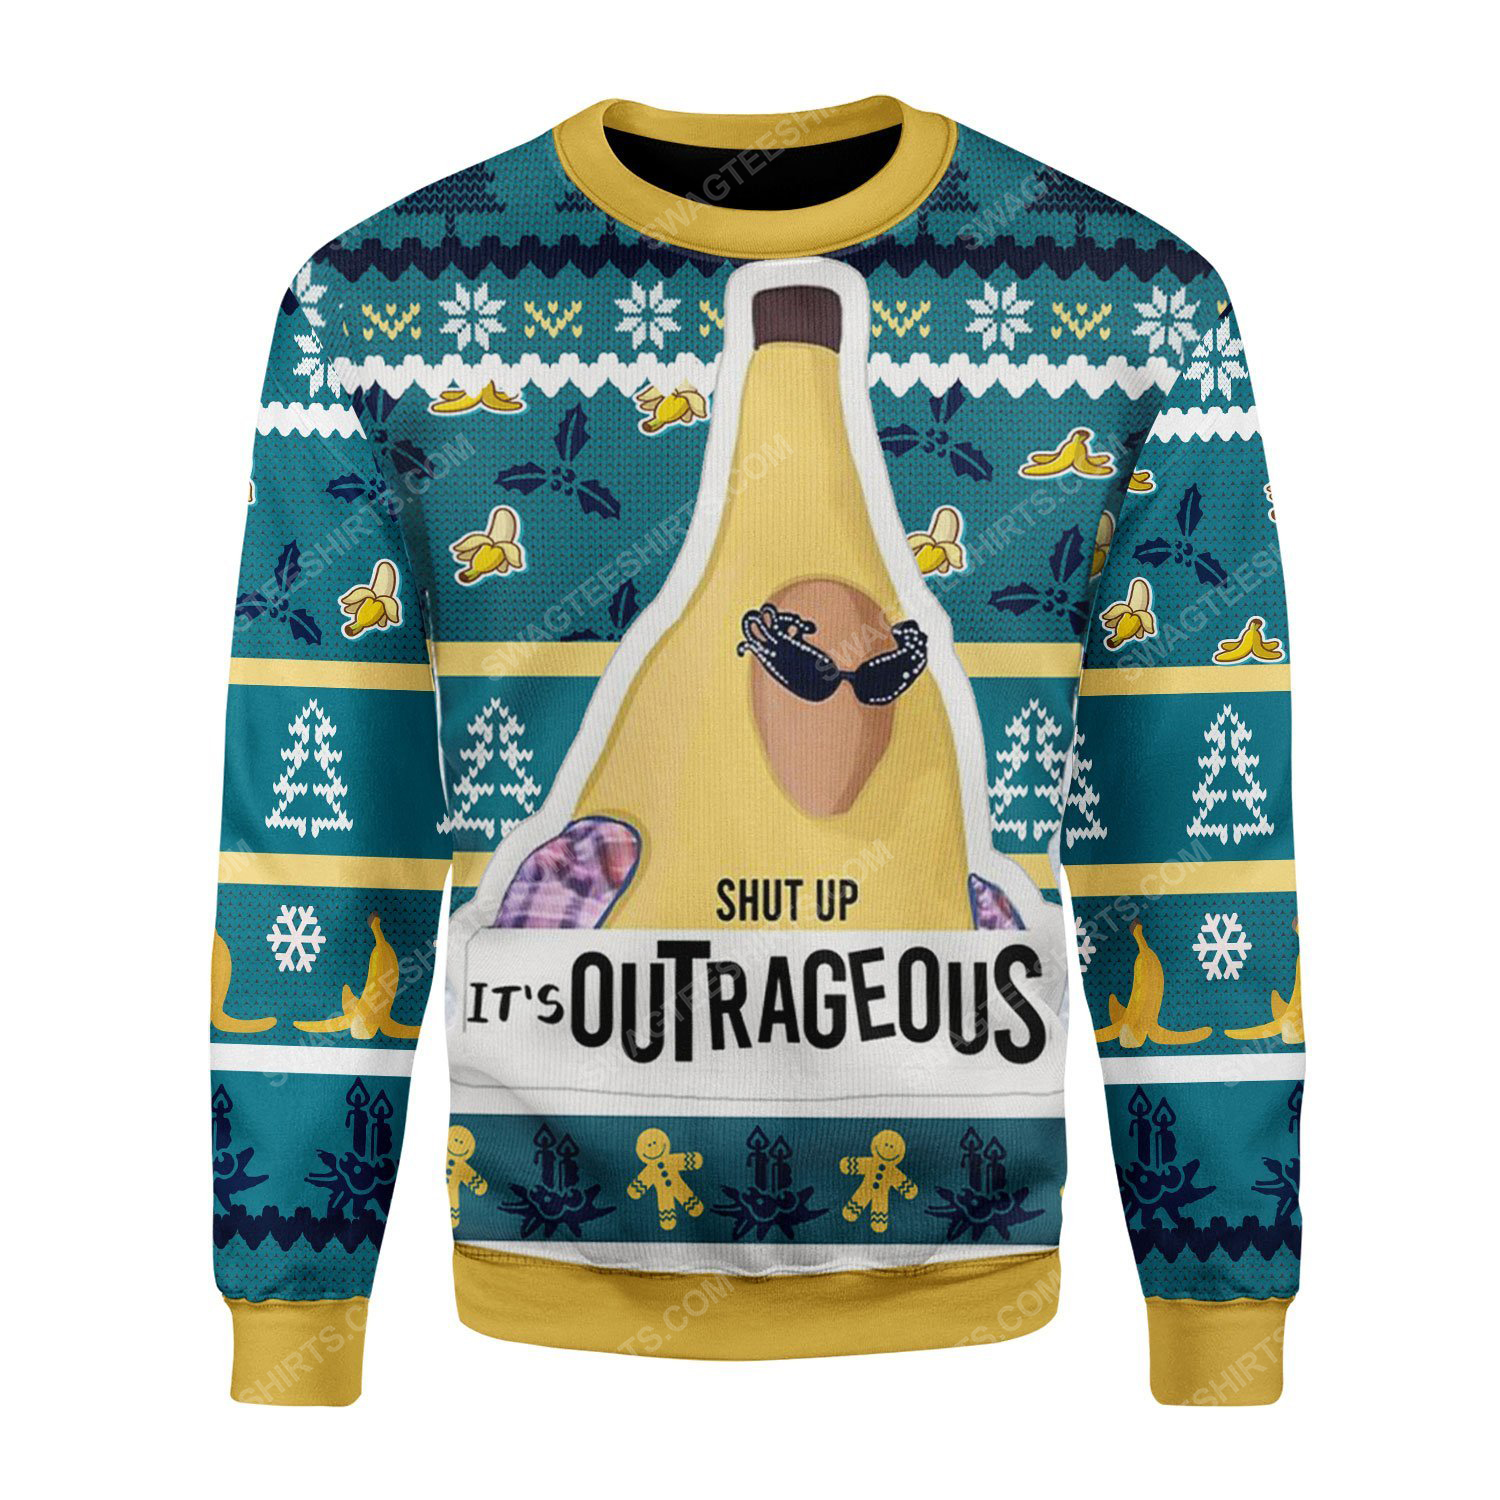 Banana liam payne shut up it's outrageous ugly christmas sweater 2(1)